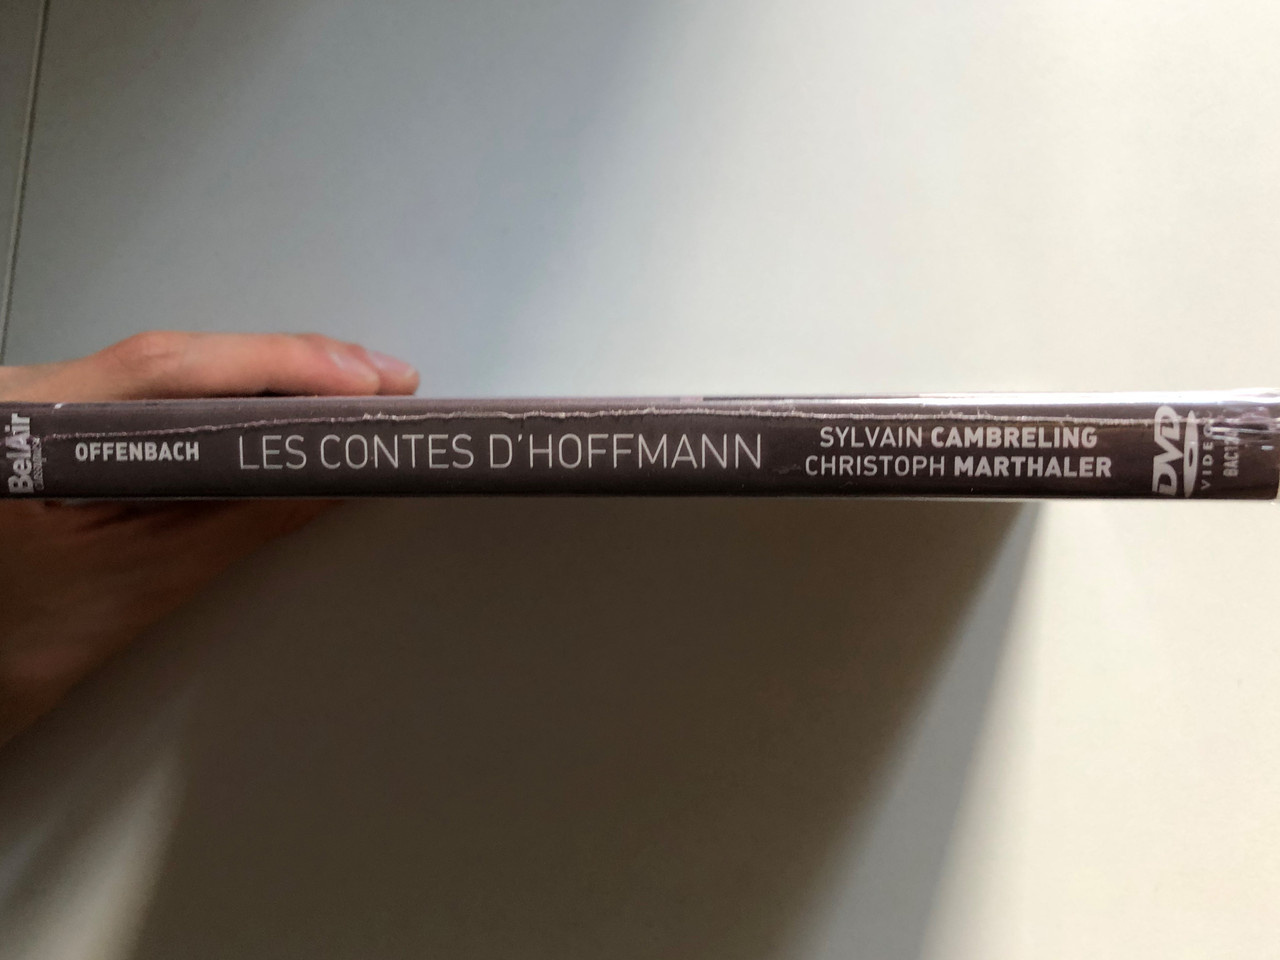 Offenbach_Les_contes_dHoffmann_The_Tales_of_Hoffmann_Fantastic_opera_in_five_acts_Libretto_JULES_BARBIER_ORCHESTRA_AND_CHORUS_ROYAL_THEATER_OF_MADRID_Conductor_SYLVAIN_CA___30925.1691728862.1280.1280.JPG (1280×960)